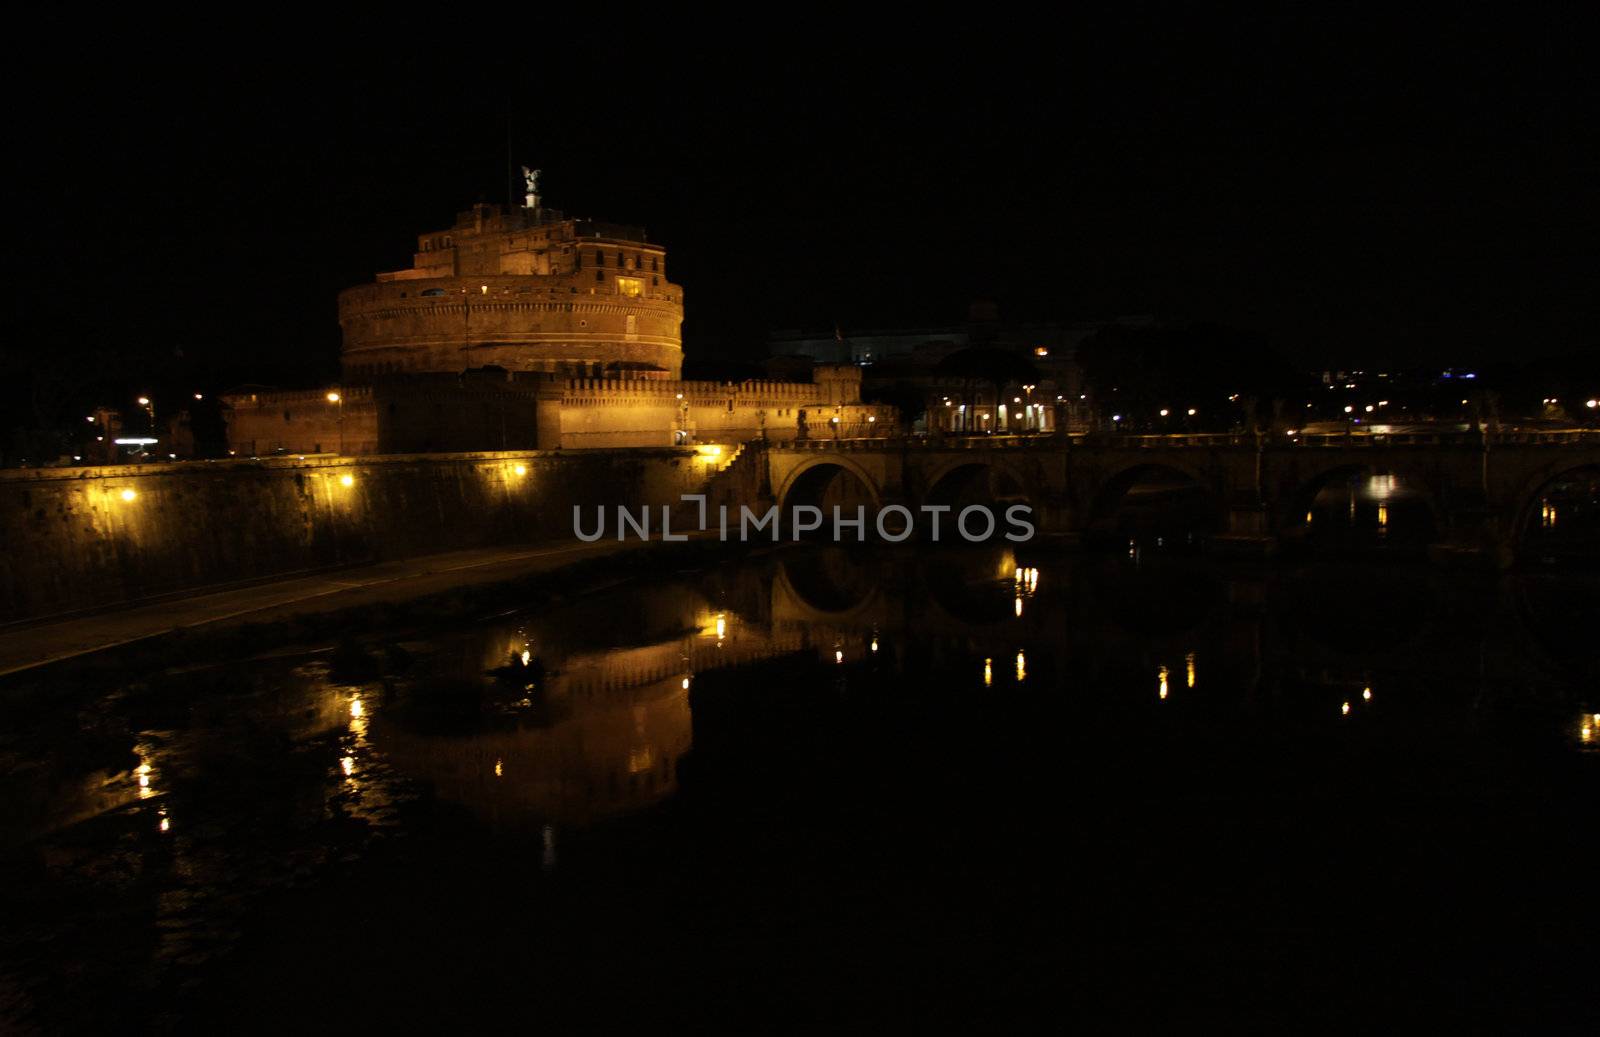 The towering Castel Sant'Angelo (Mausoleum of Hadrian) in Rome, Italy.  Shot at night from across the Tiber river.
